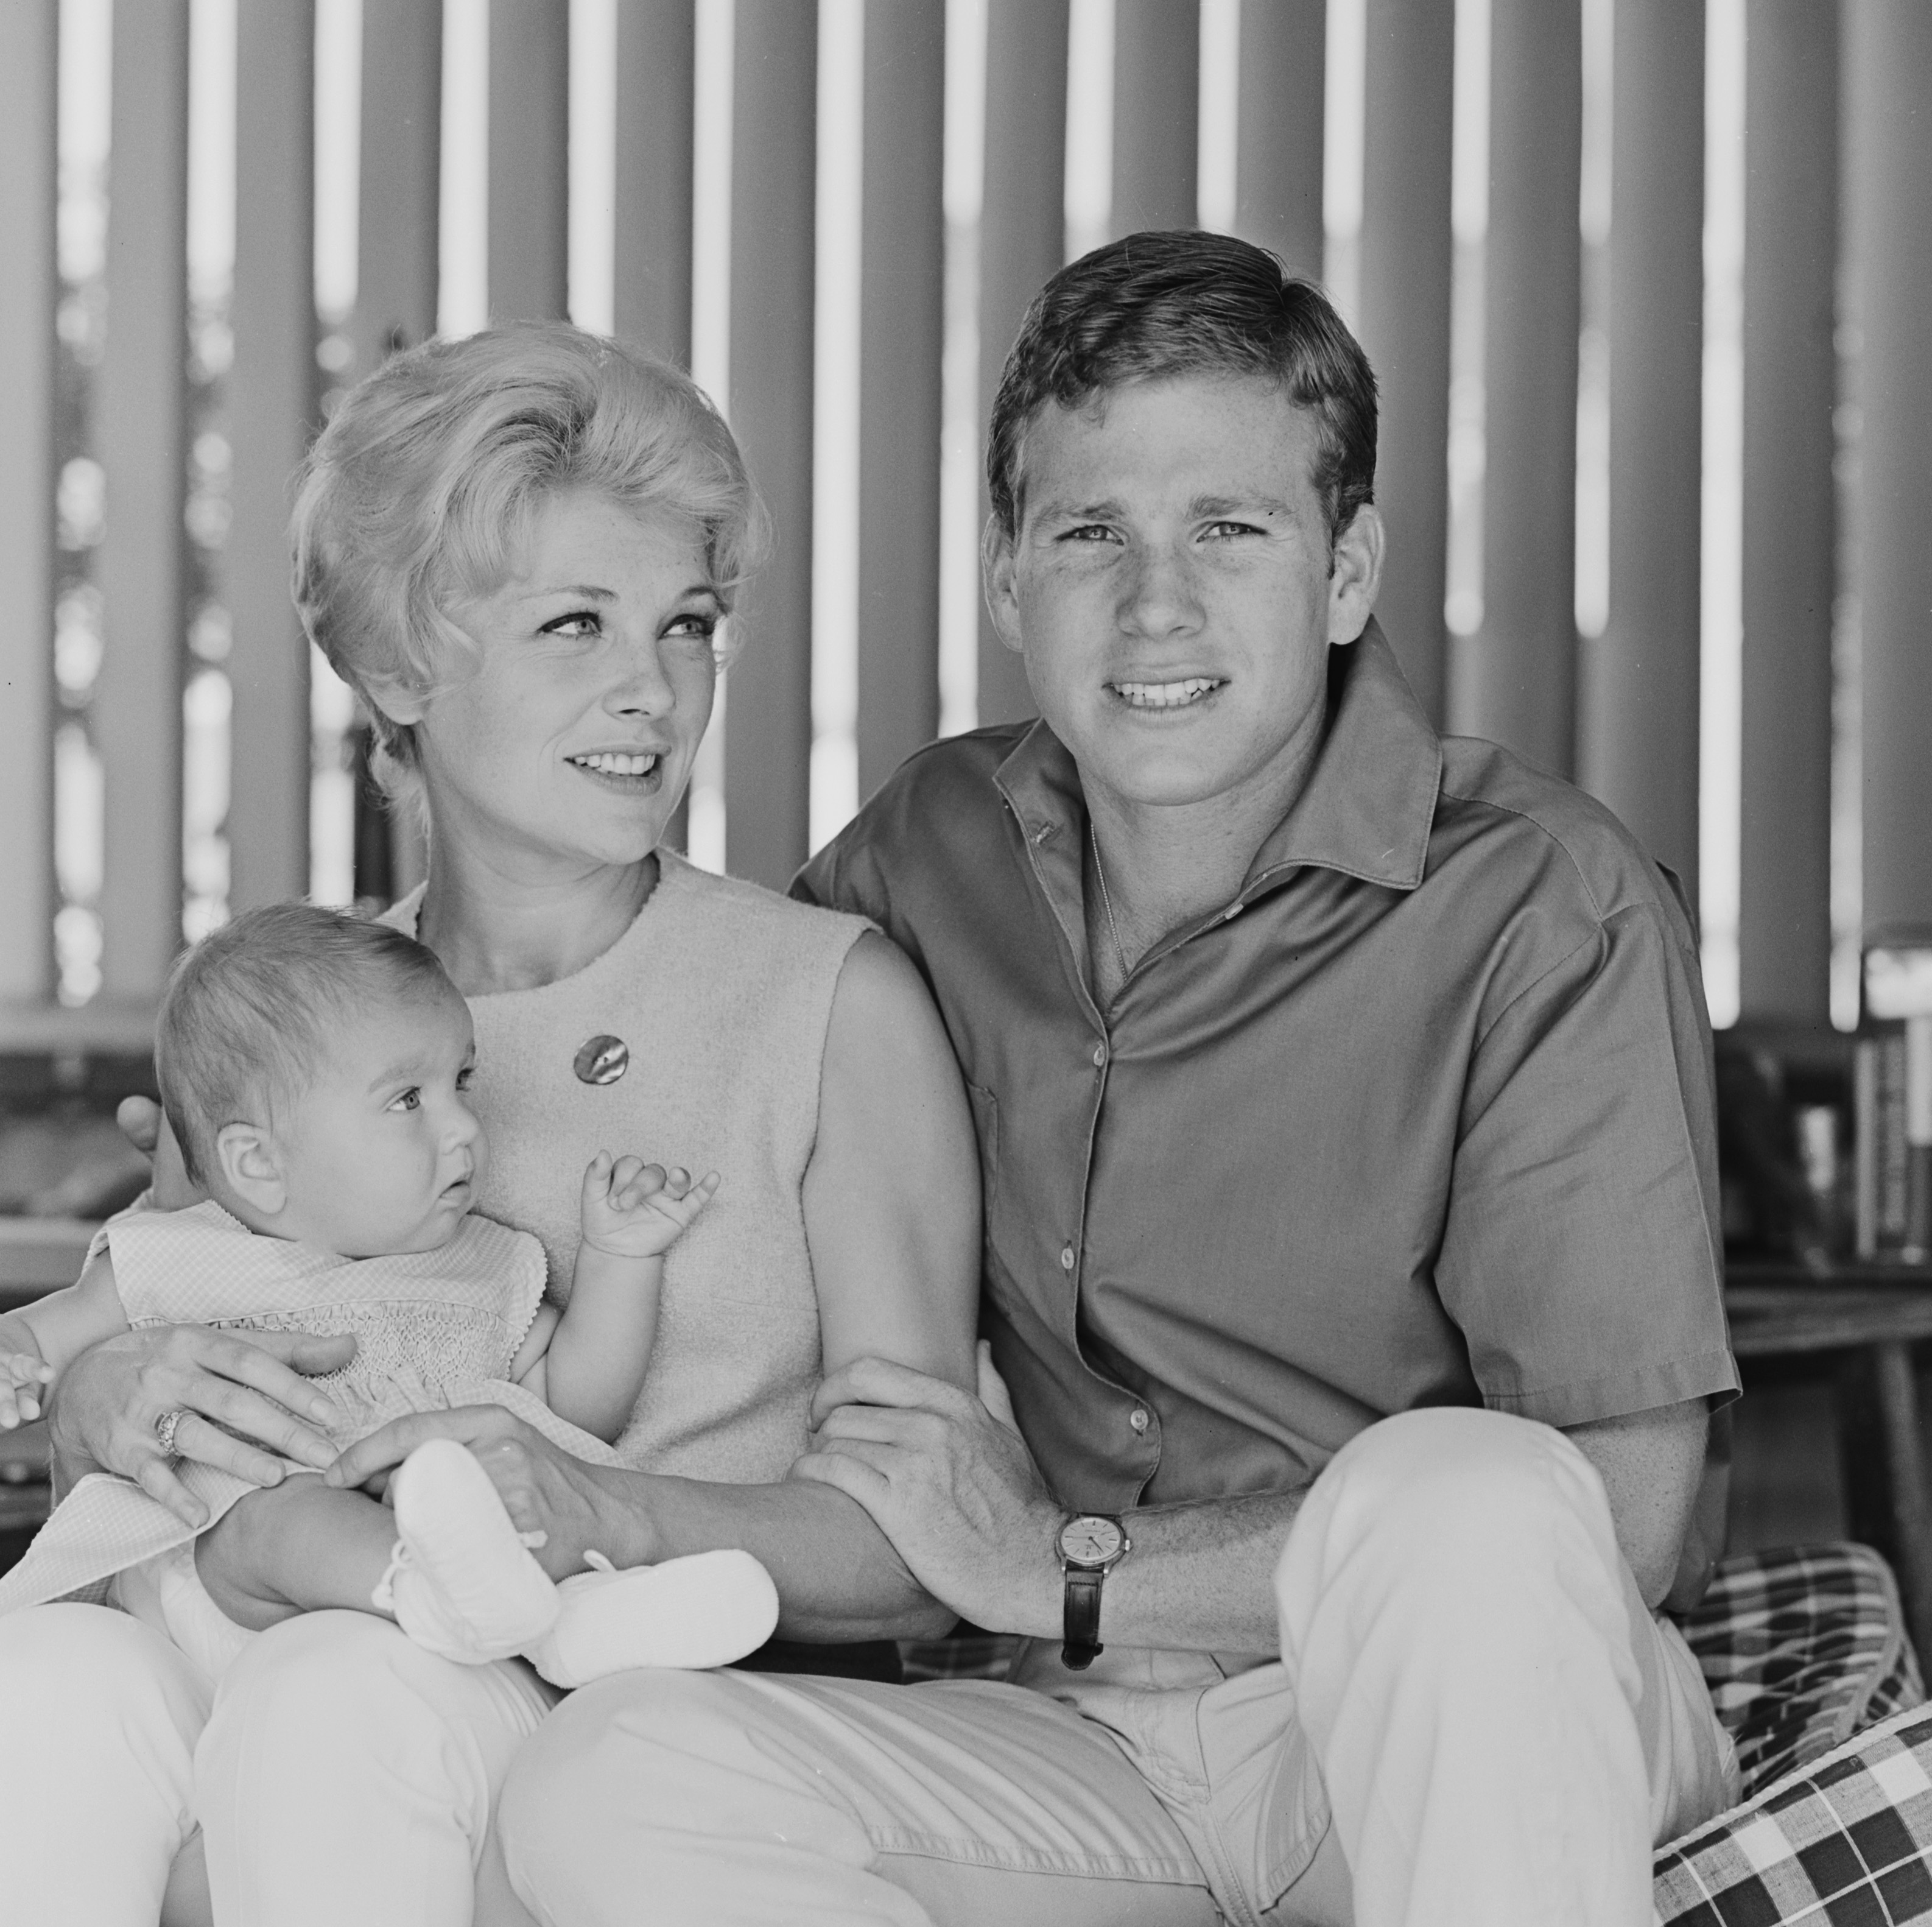 Joanna Moore and Ryan O’Neal at home with their daughter, Tatum O'Neal behind the scenes during the making of the ABC TV series Peyton Place in 1964